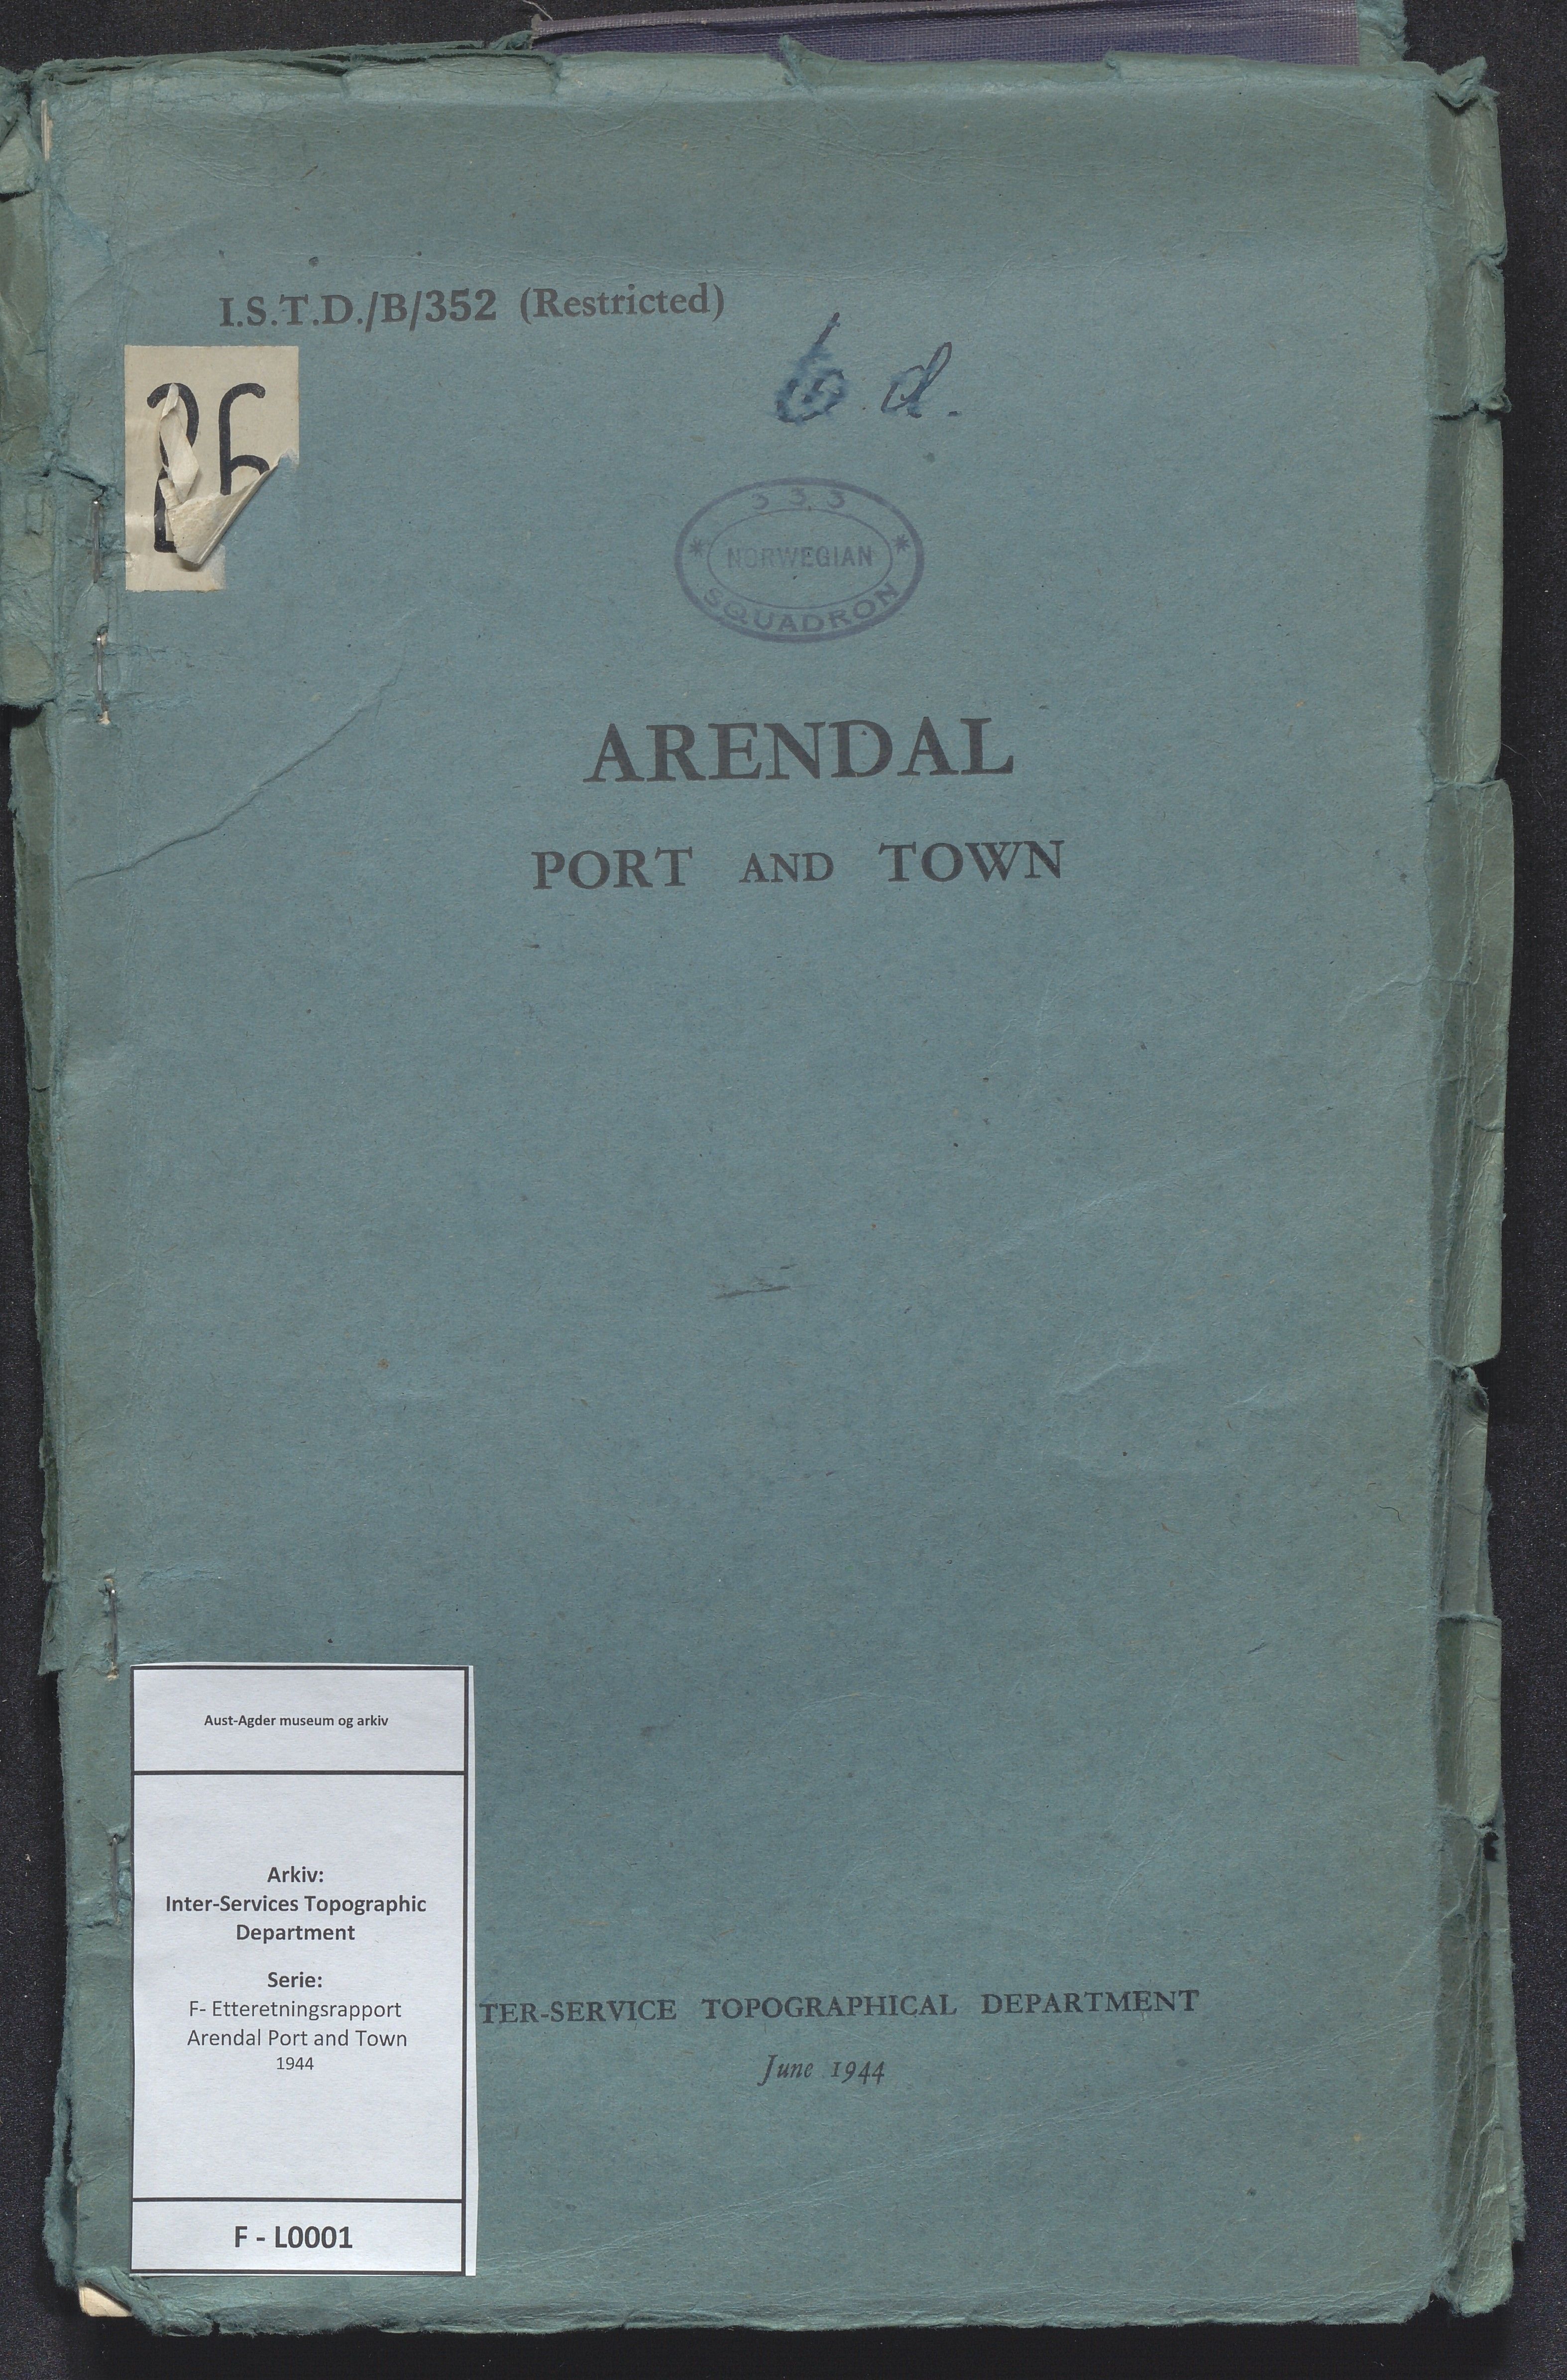 Inter-Services Topographic Department, AAKS/PA-3083/F/L0001: Arendal Port and Town, 1944